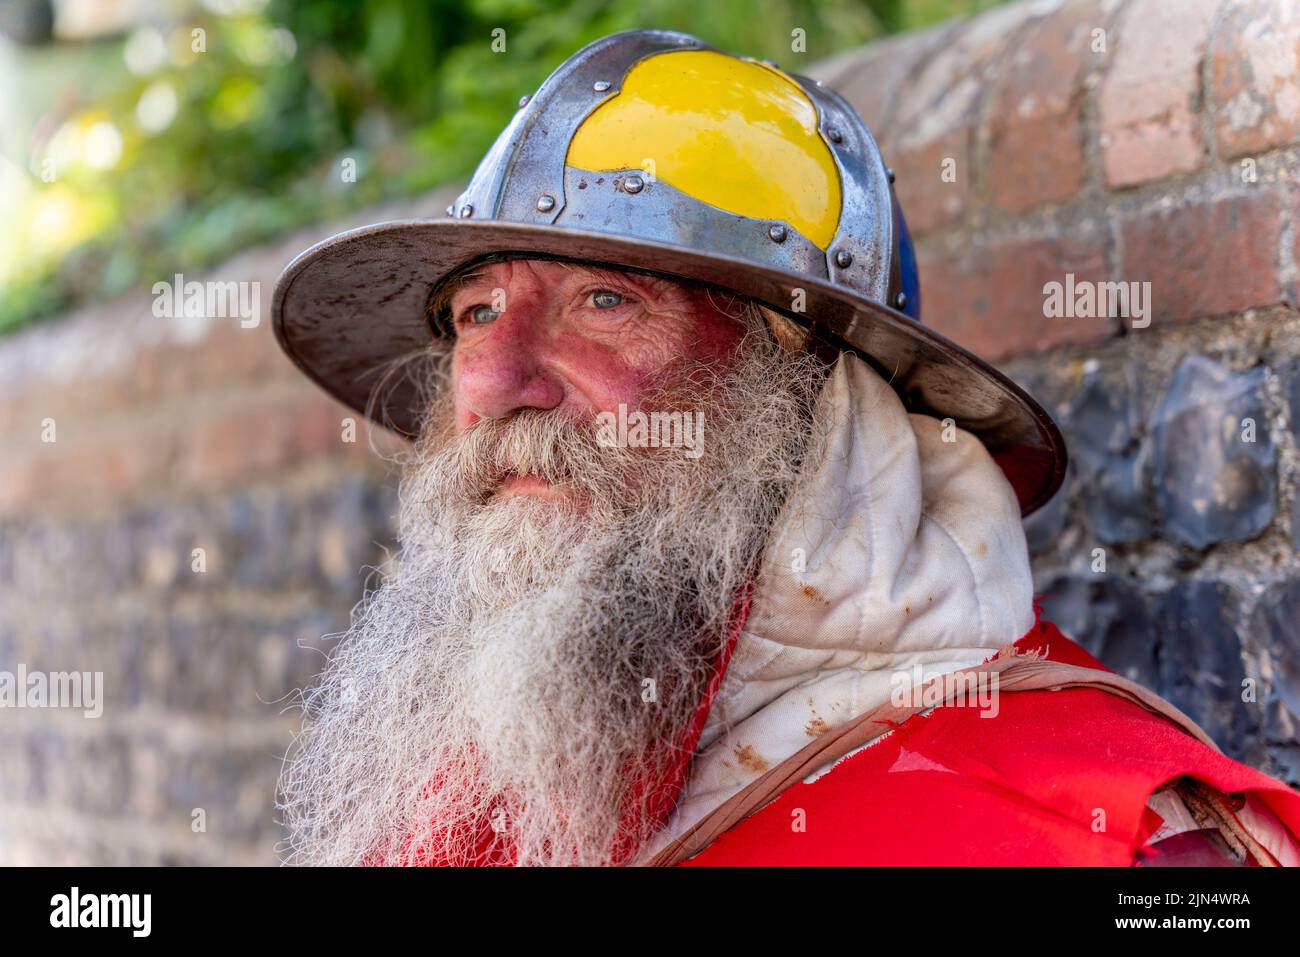 A Man Dressed In Medieval Costume Prepares To Take Part In A Re-Enactment Of The Battle Of Lewes , Lewes, East Sussex, UK Stock Photo